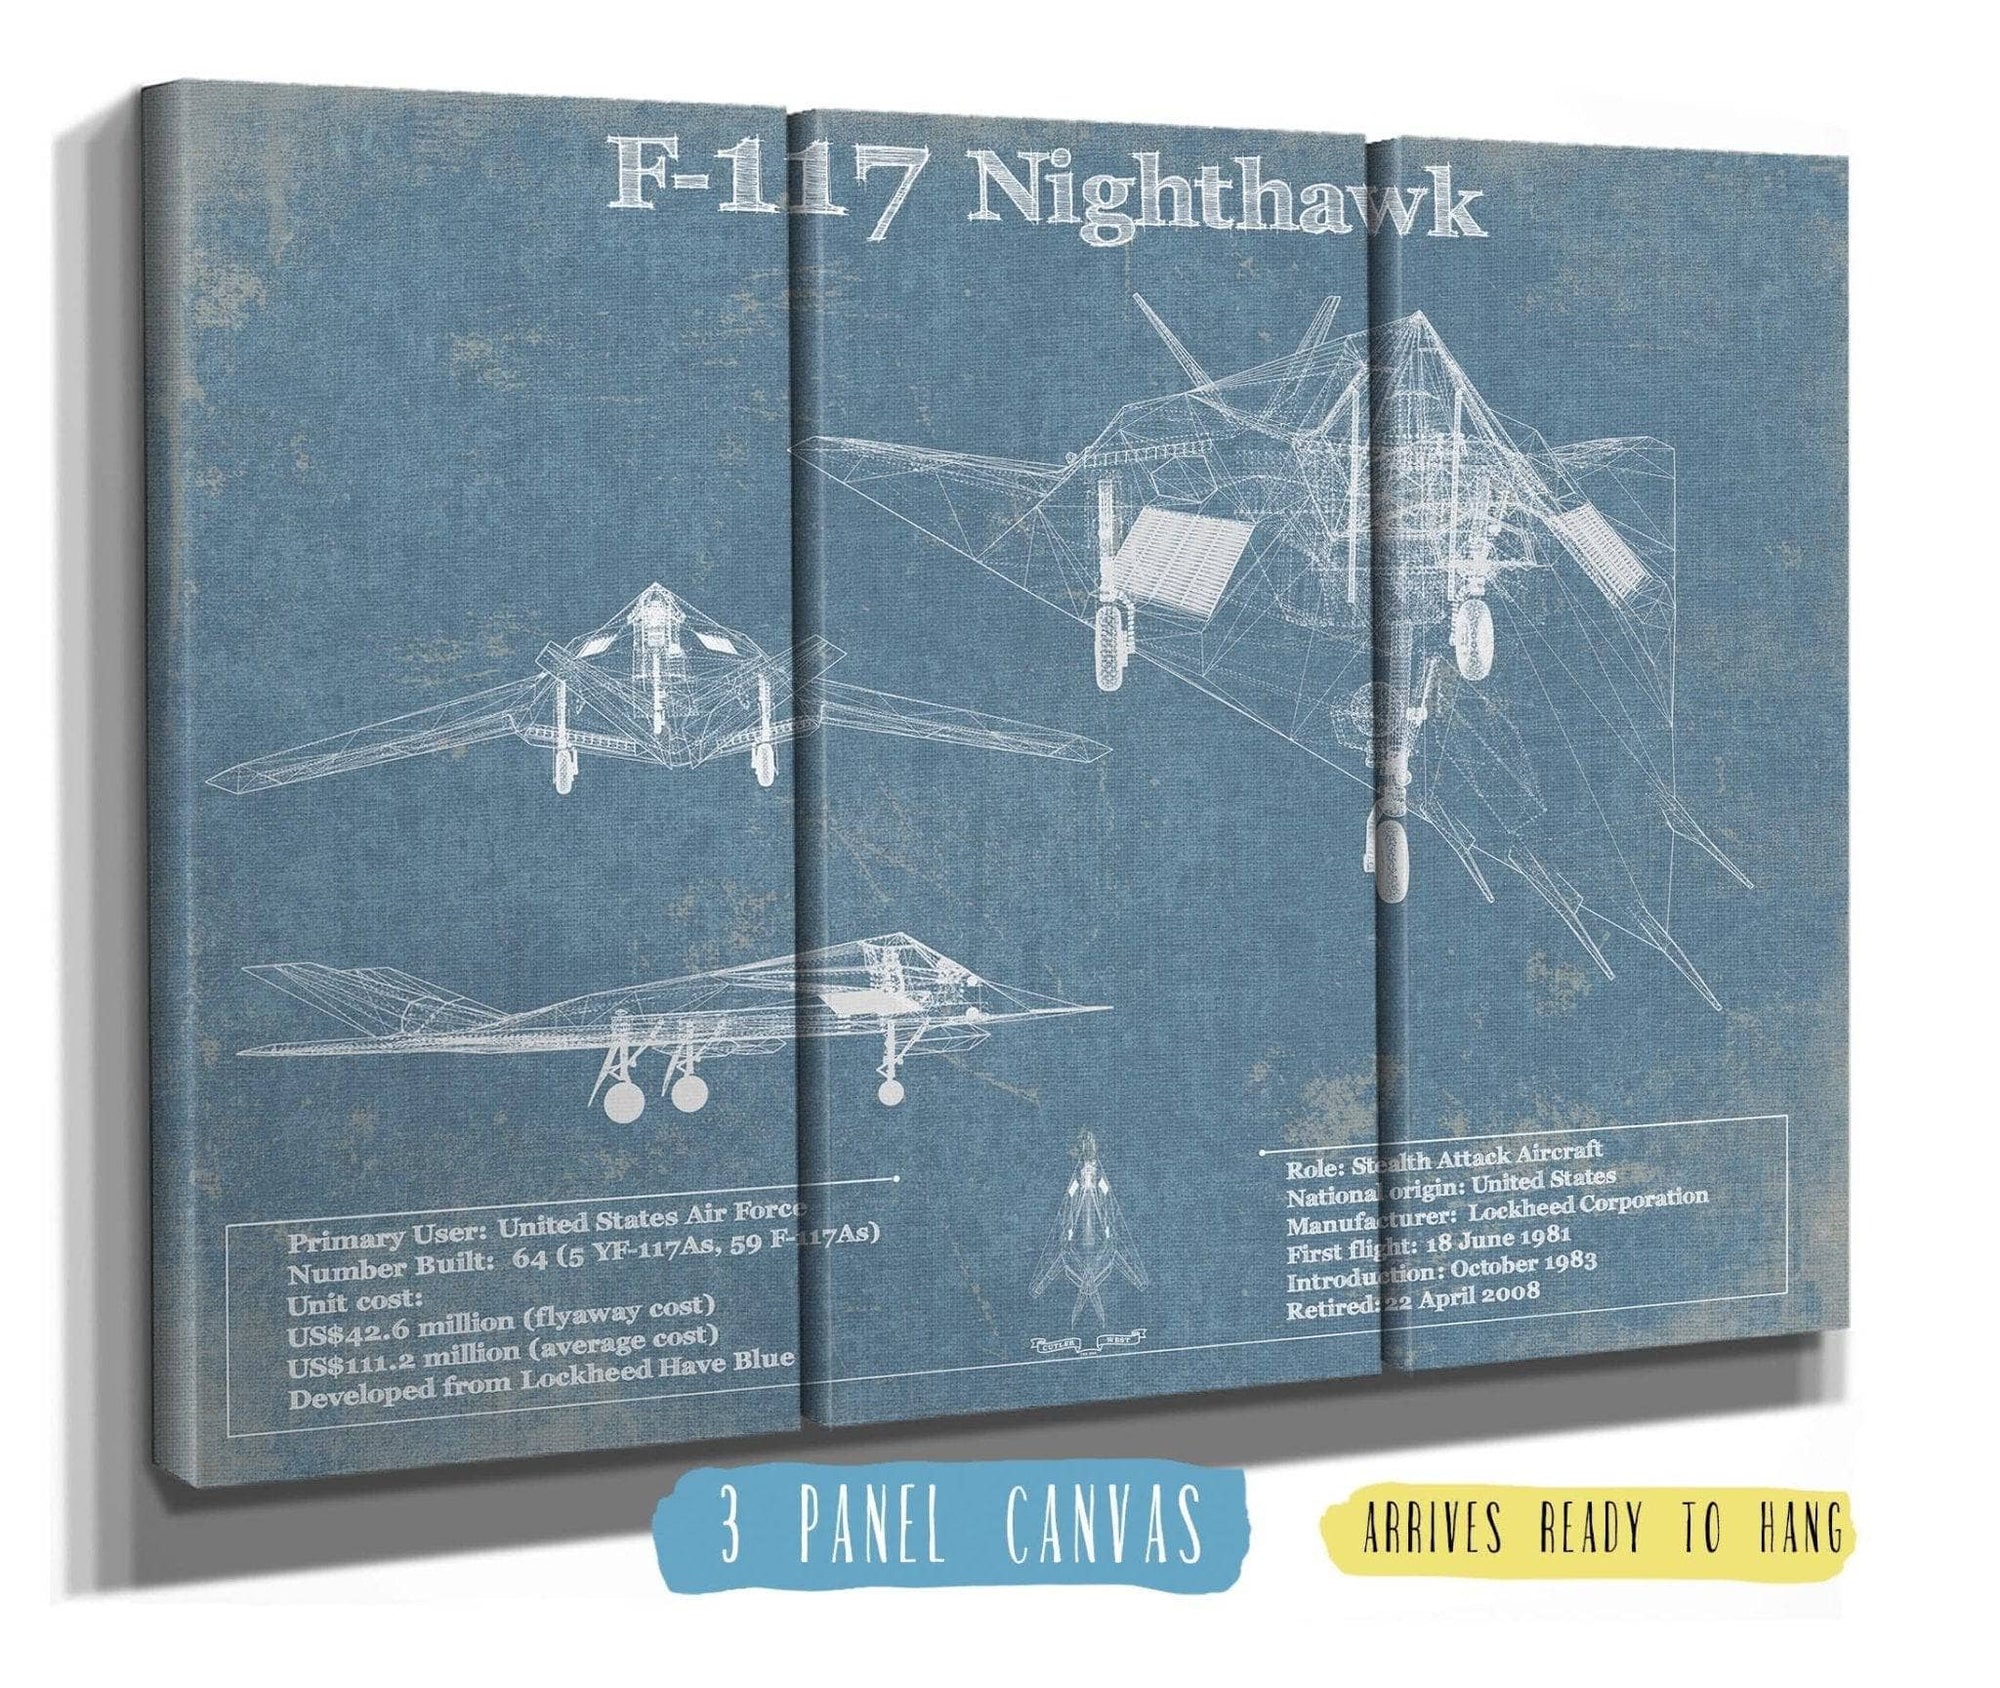 Cutler West Military Aircraft 48" x 32" / 3 Panel Canvas Wrap F-117 Nighthawk Military Aircraft Patent - Blueprint Military Wall Art 766208918_62317